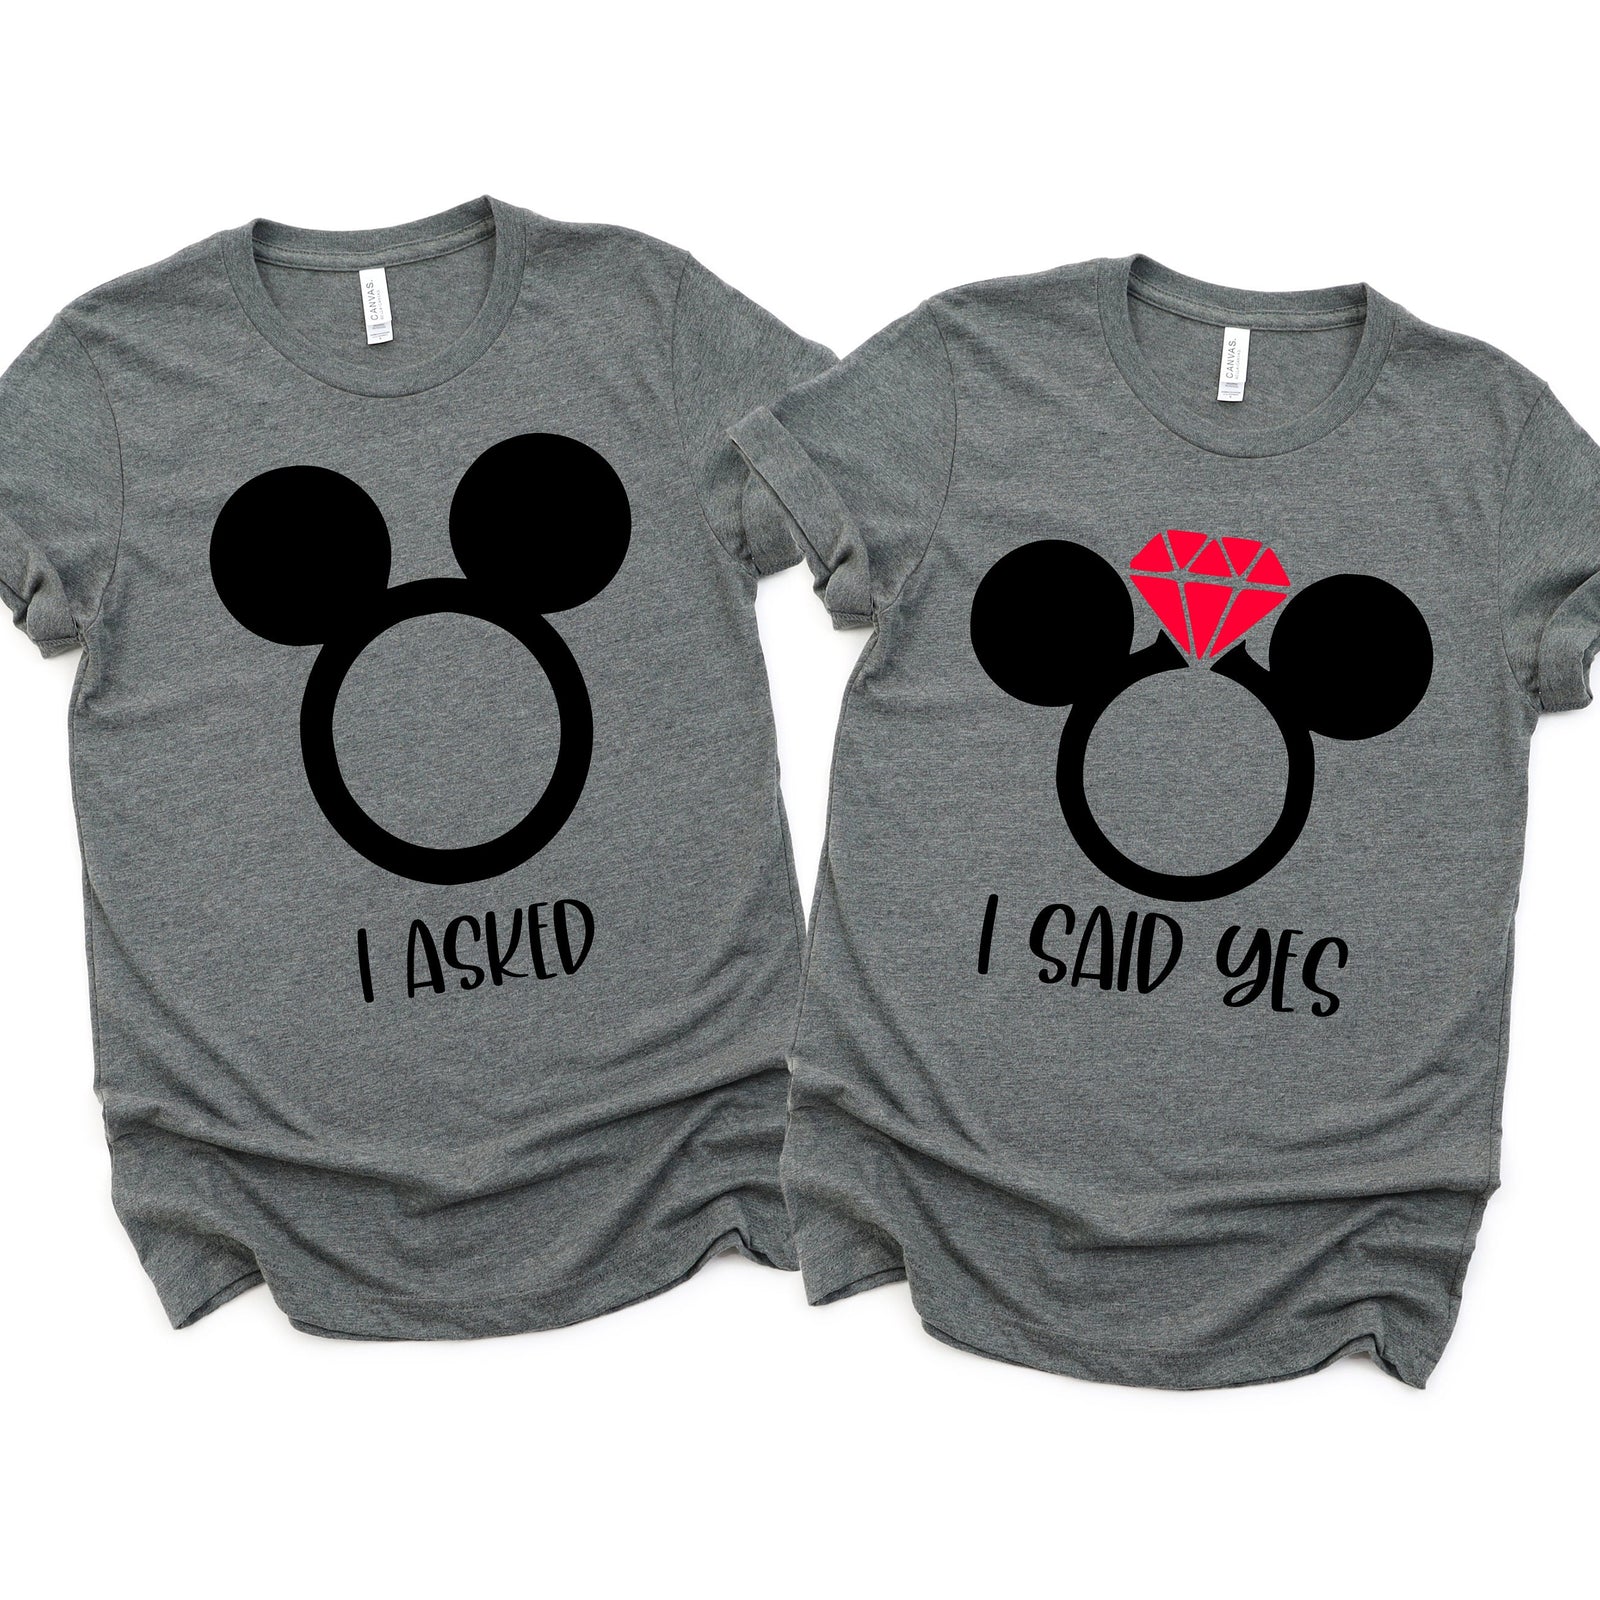 I asked I said Yes - Disney Couples Matching Unisex T Shirts - Mickey and Minnie Mouse - Just Engaged